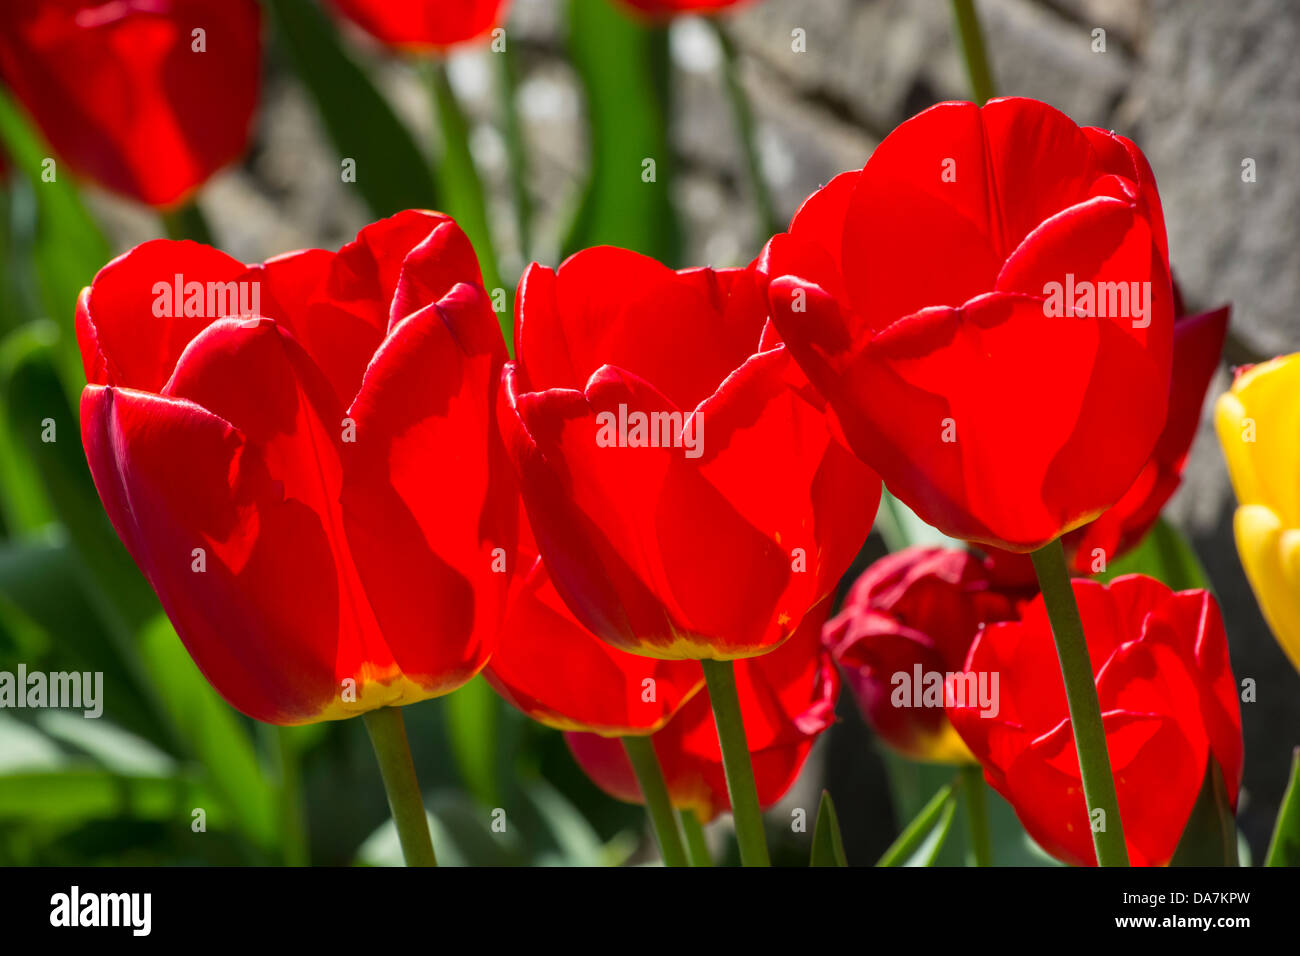 Three glorious red tulips in full bloom on a lovely sunny day Stock Photo